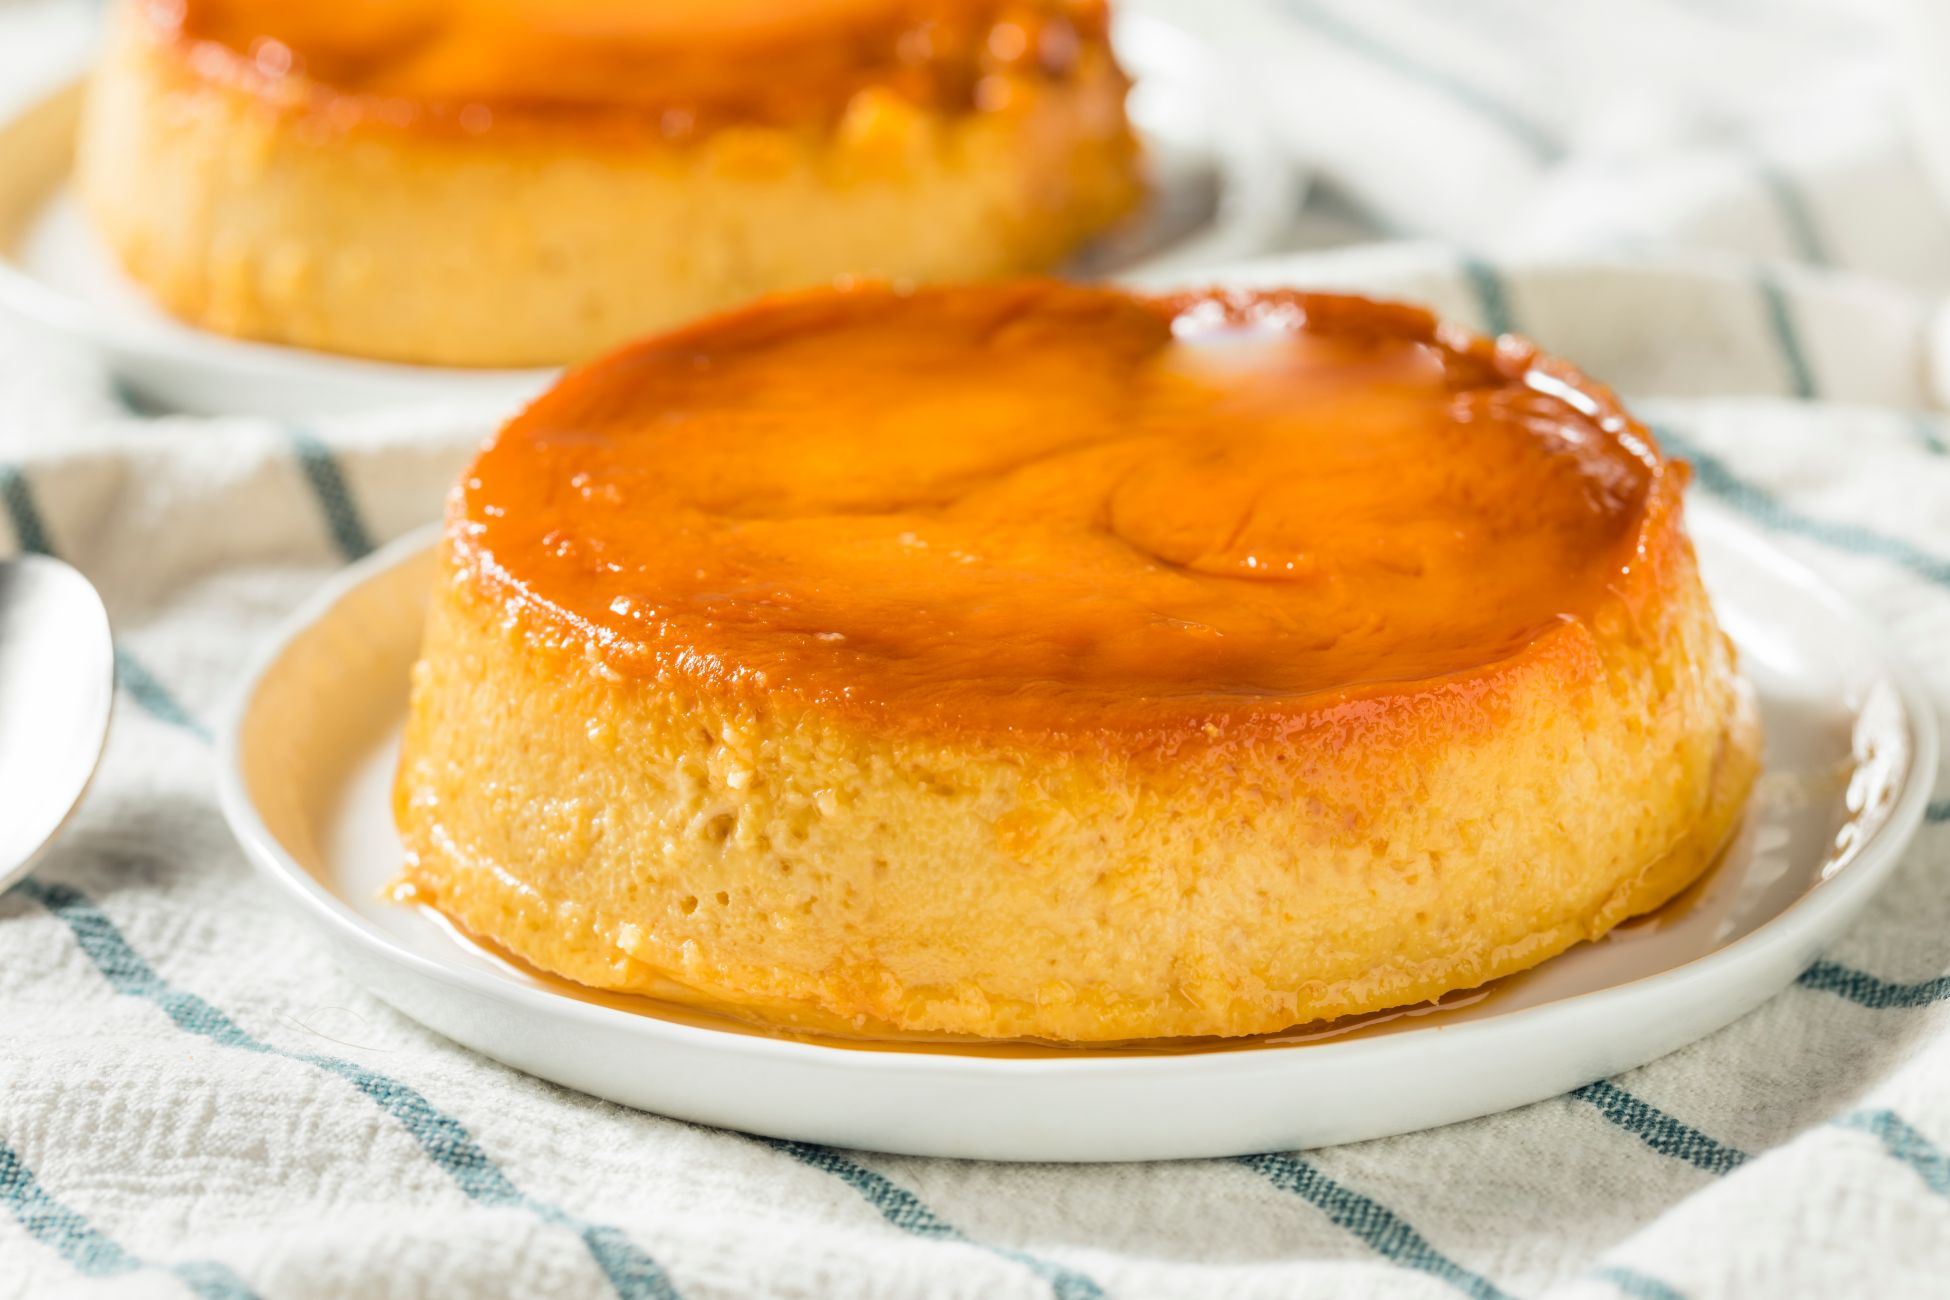 Making the Perfect Flan Every Time